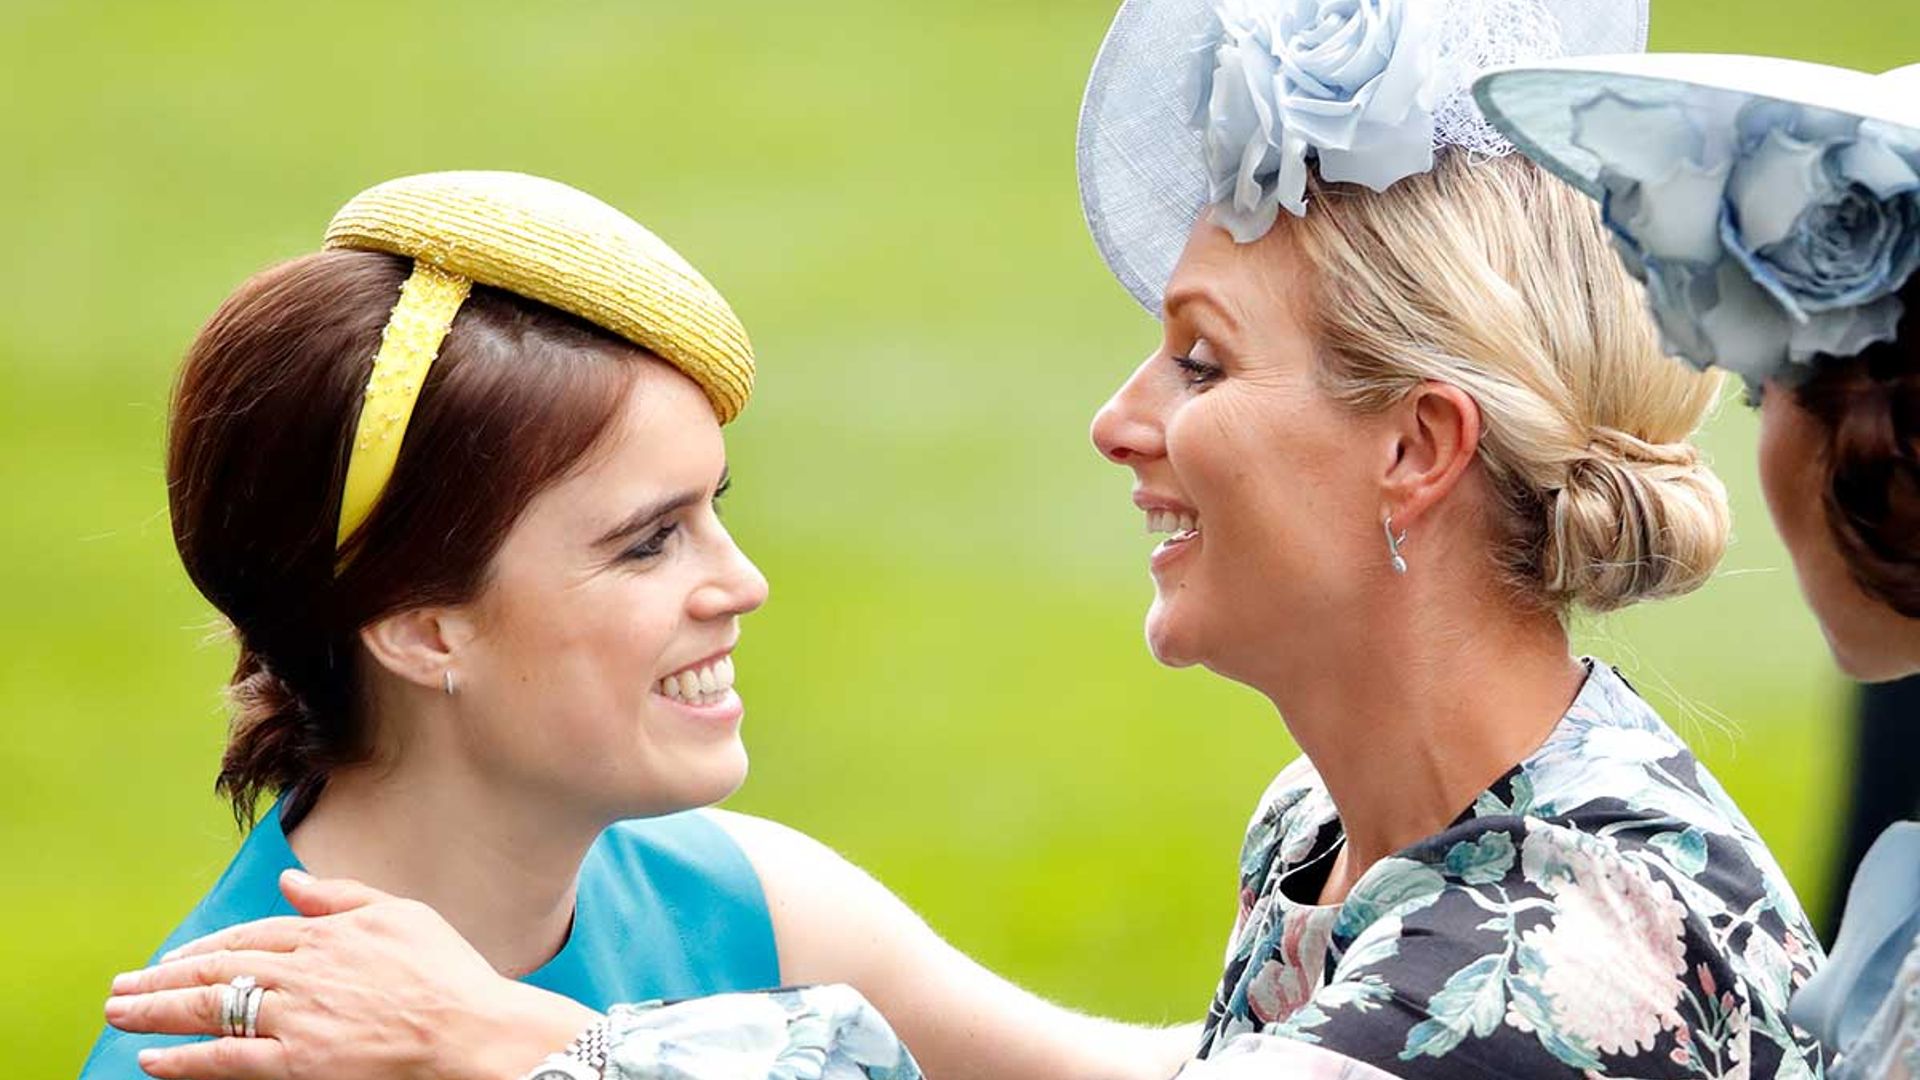 Touching connection between Zara Tindall and Princess Eugenie's sons revealed